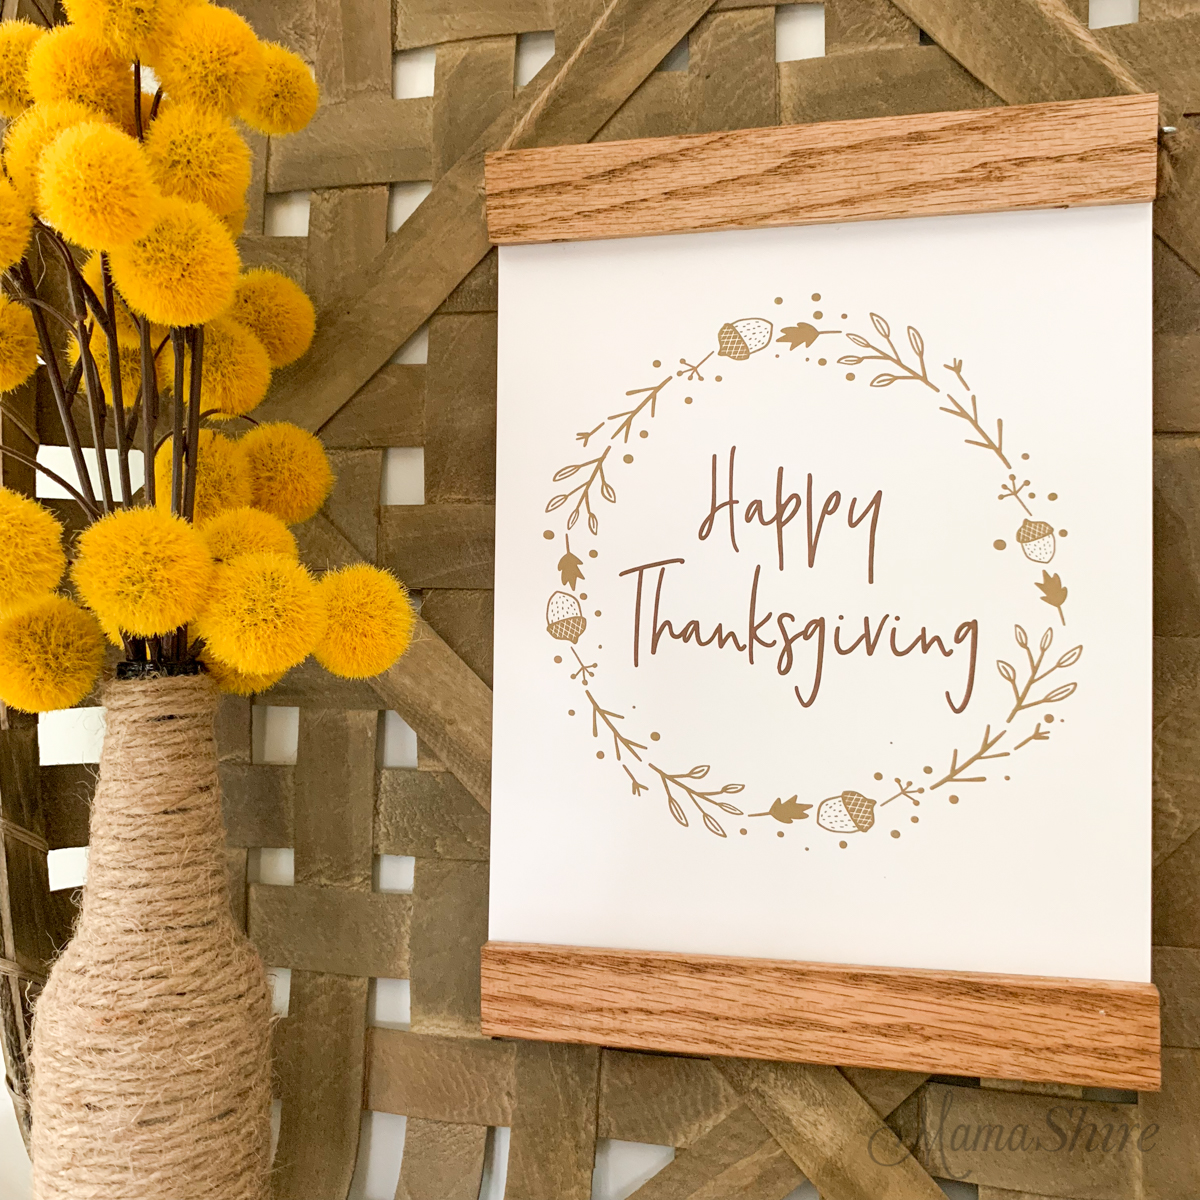 50 BEST Thanksgiving Printables! - The Inspiration Board